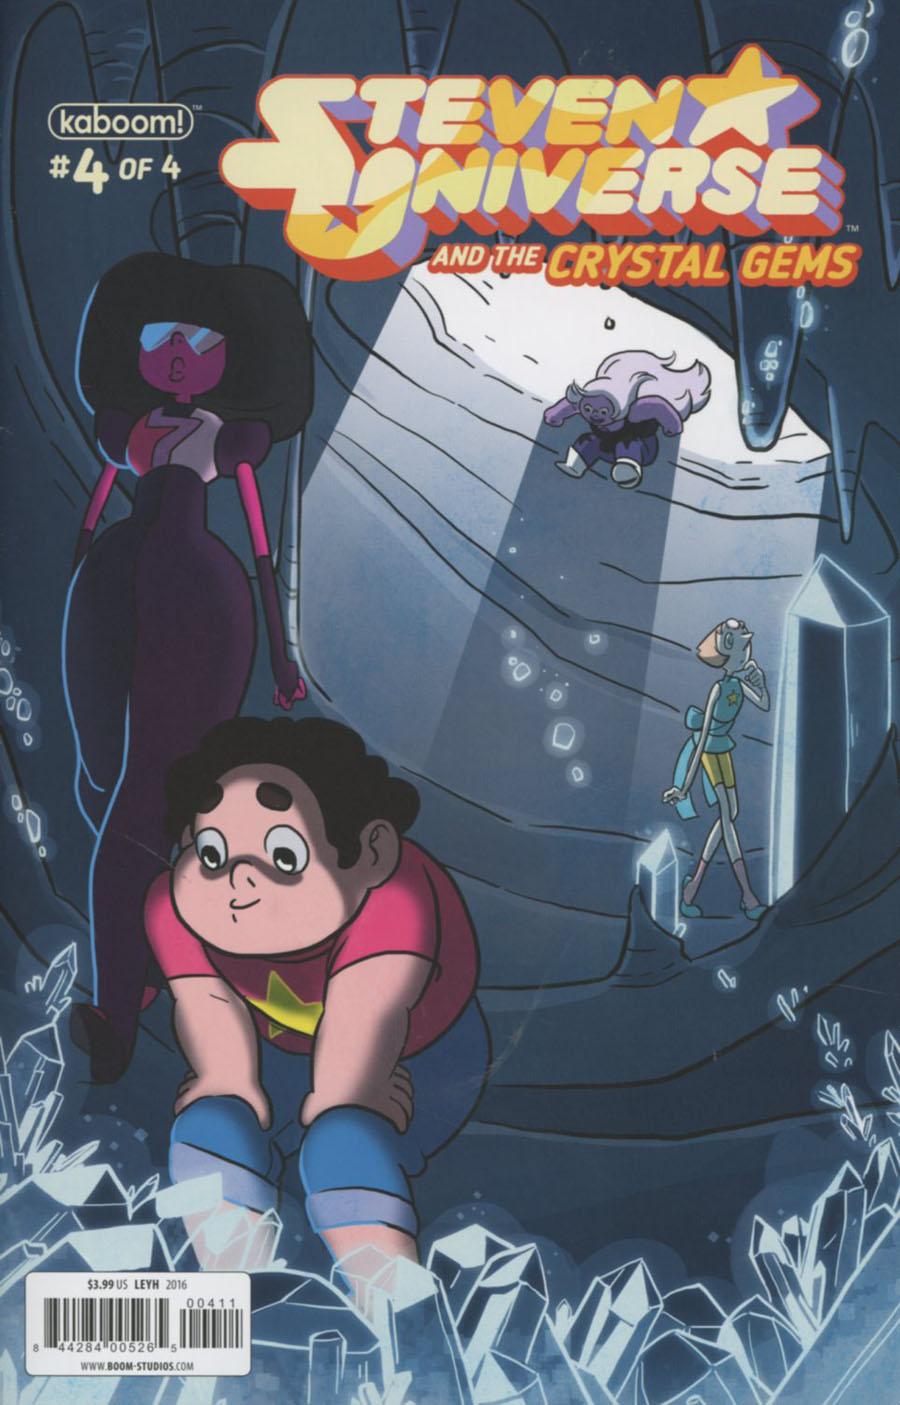 Steven Universe And The Crystal Gems Vol. 1 #4